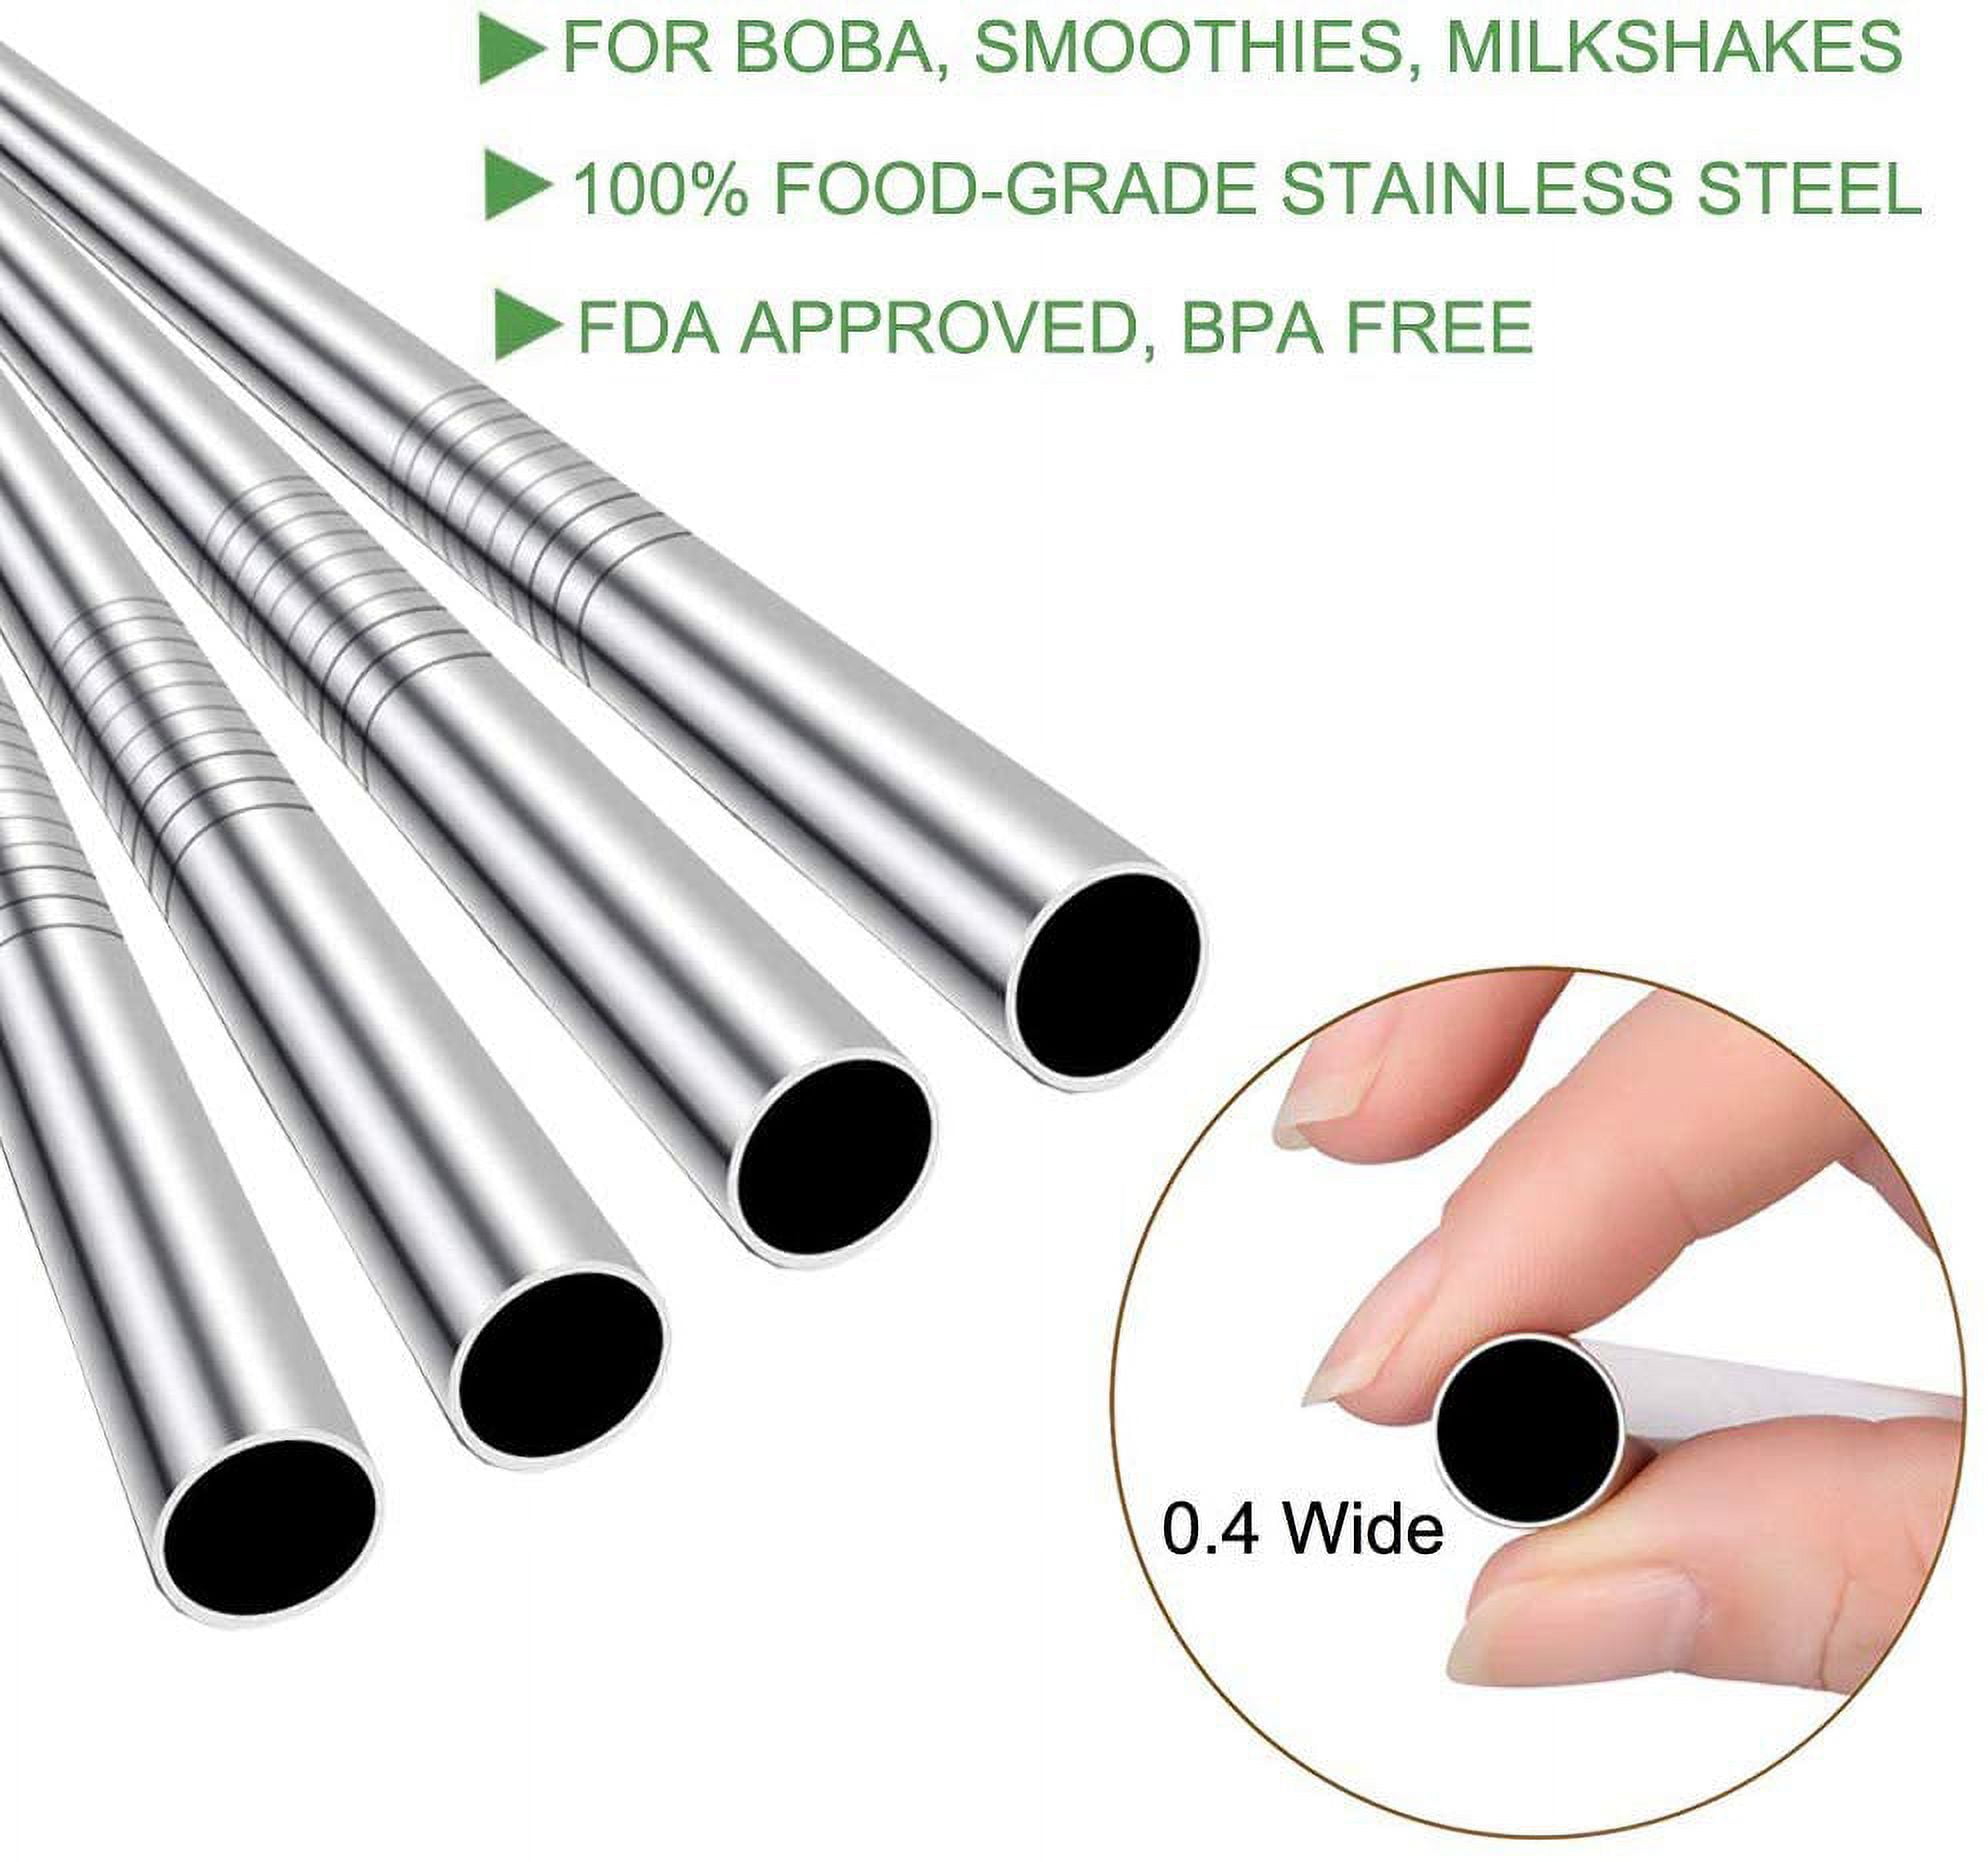 Vannise Stainless Steel Smoothie Straws, 0.4' Extra Wide Reusable Metal Drinking Straws for Milkshake, Boba, Smoothie, Beverage, Set of 4 with 1